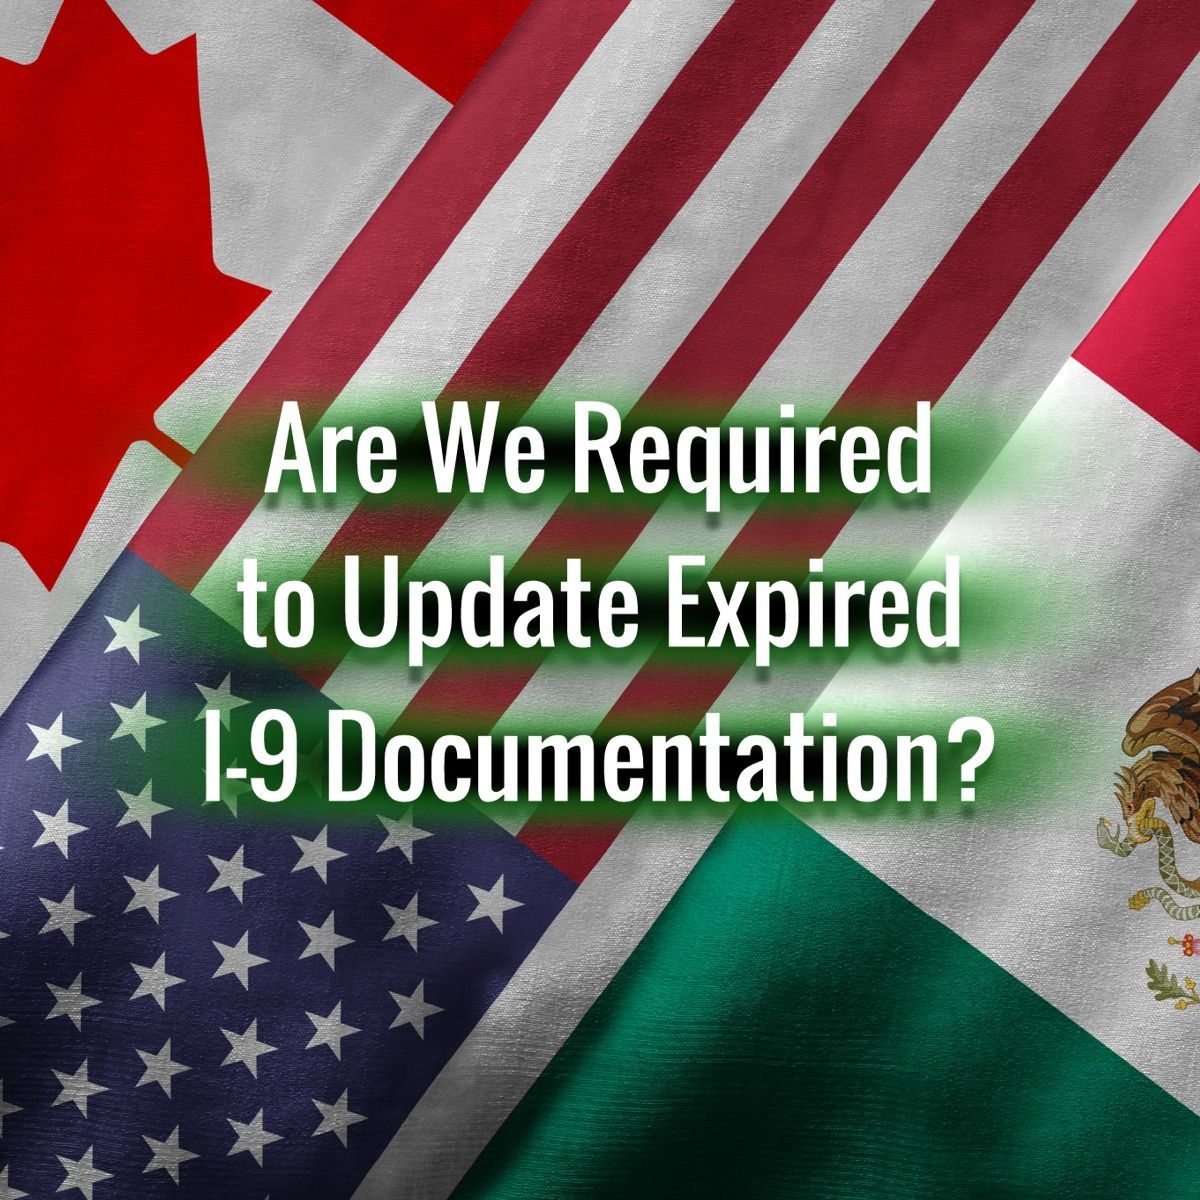 Are We Required to Update Expired I-9 Documentation?